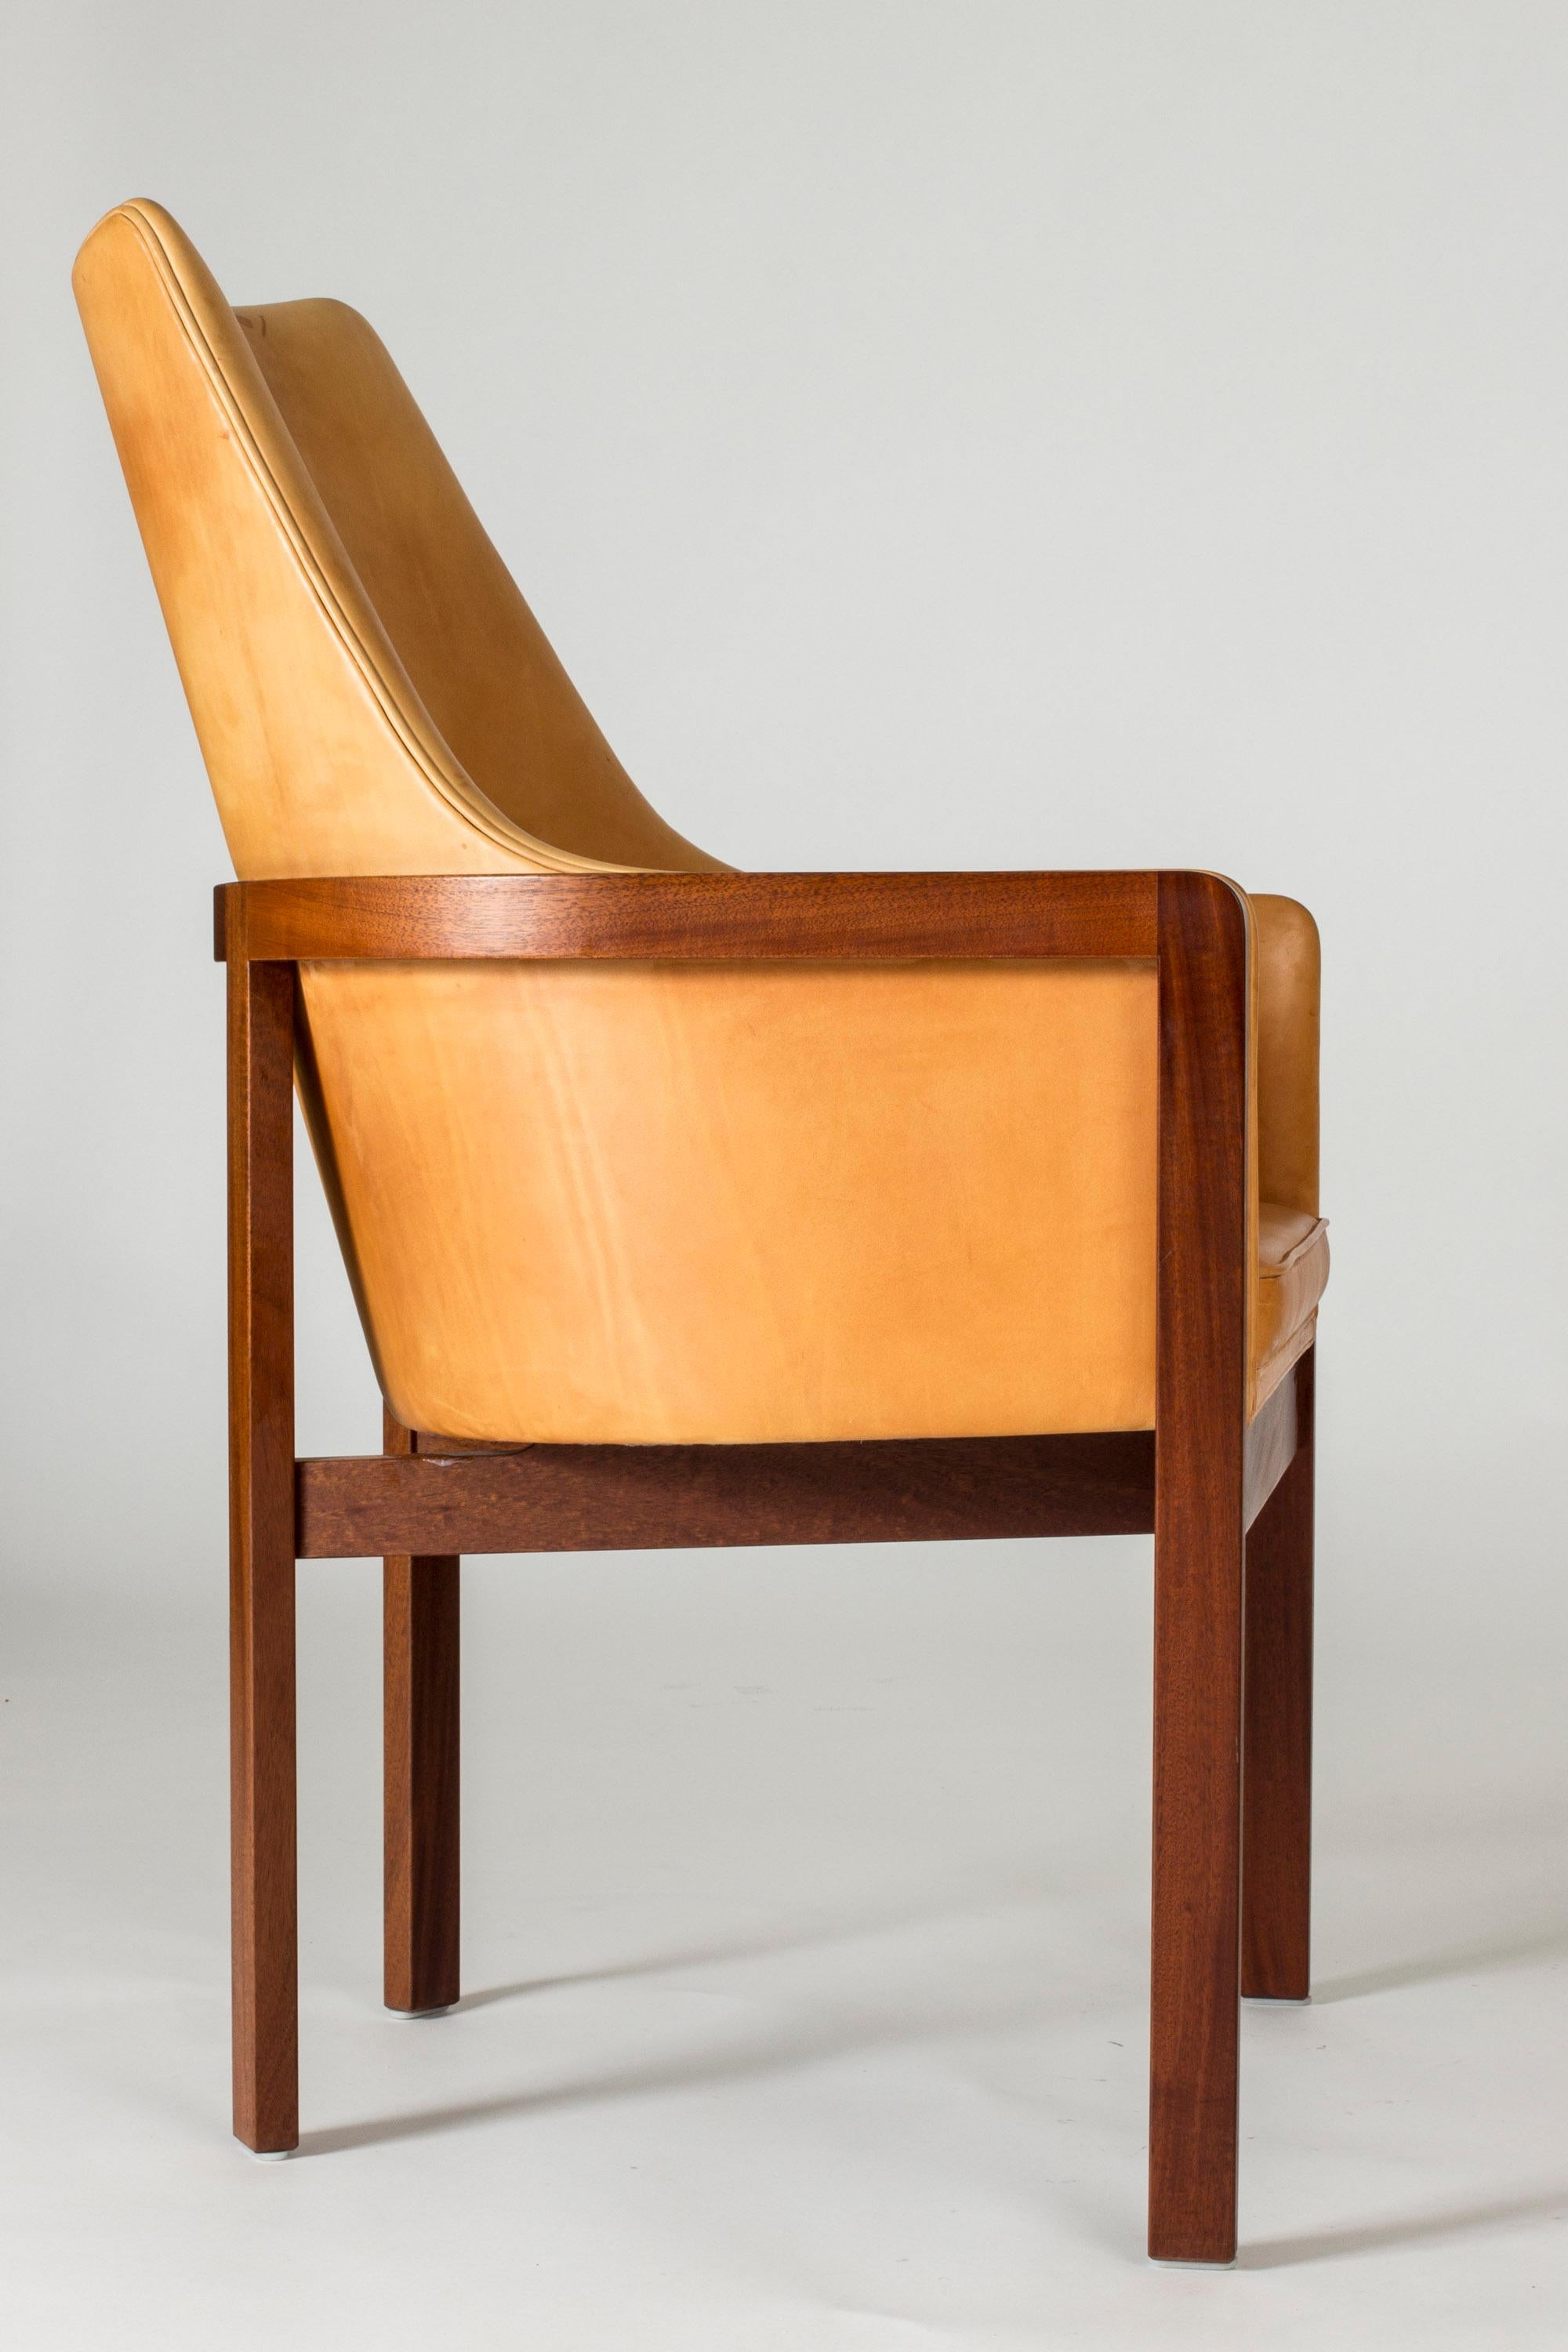 Wood Pair of Lounge Chairs by Bernt Petersen, Denmark, 1960s For Sale